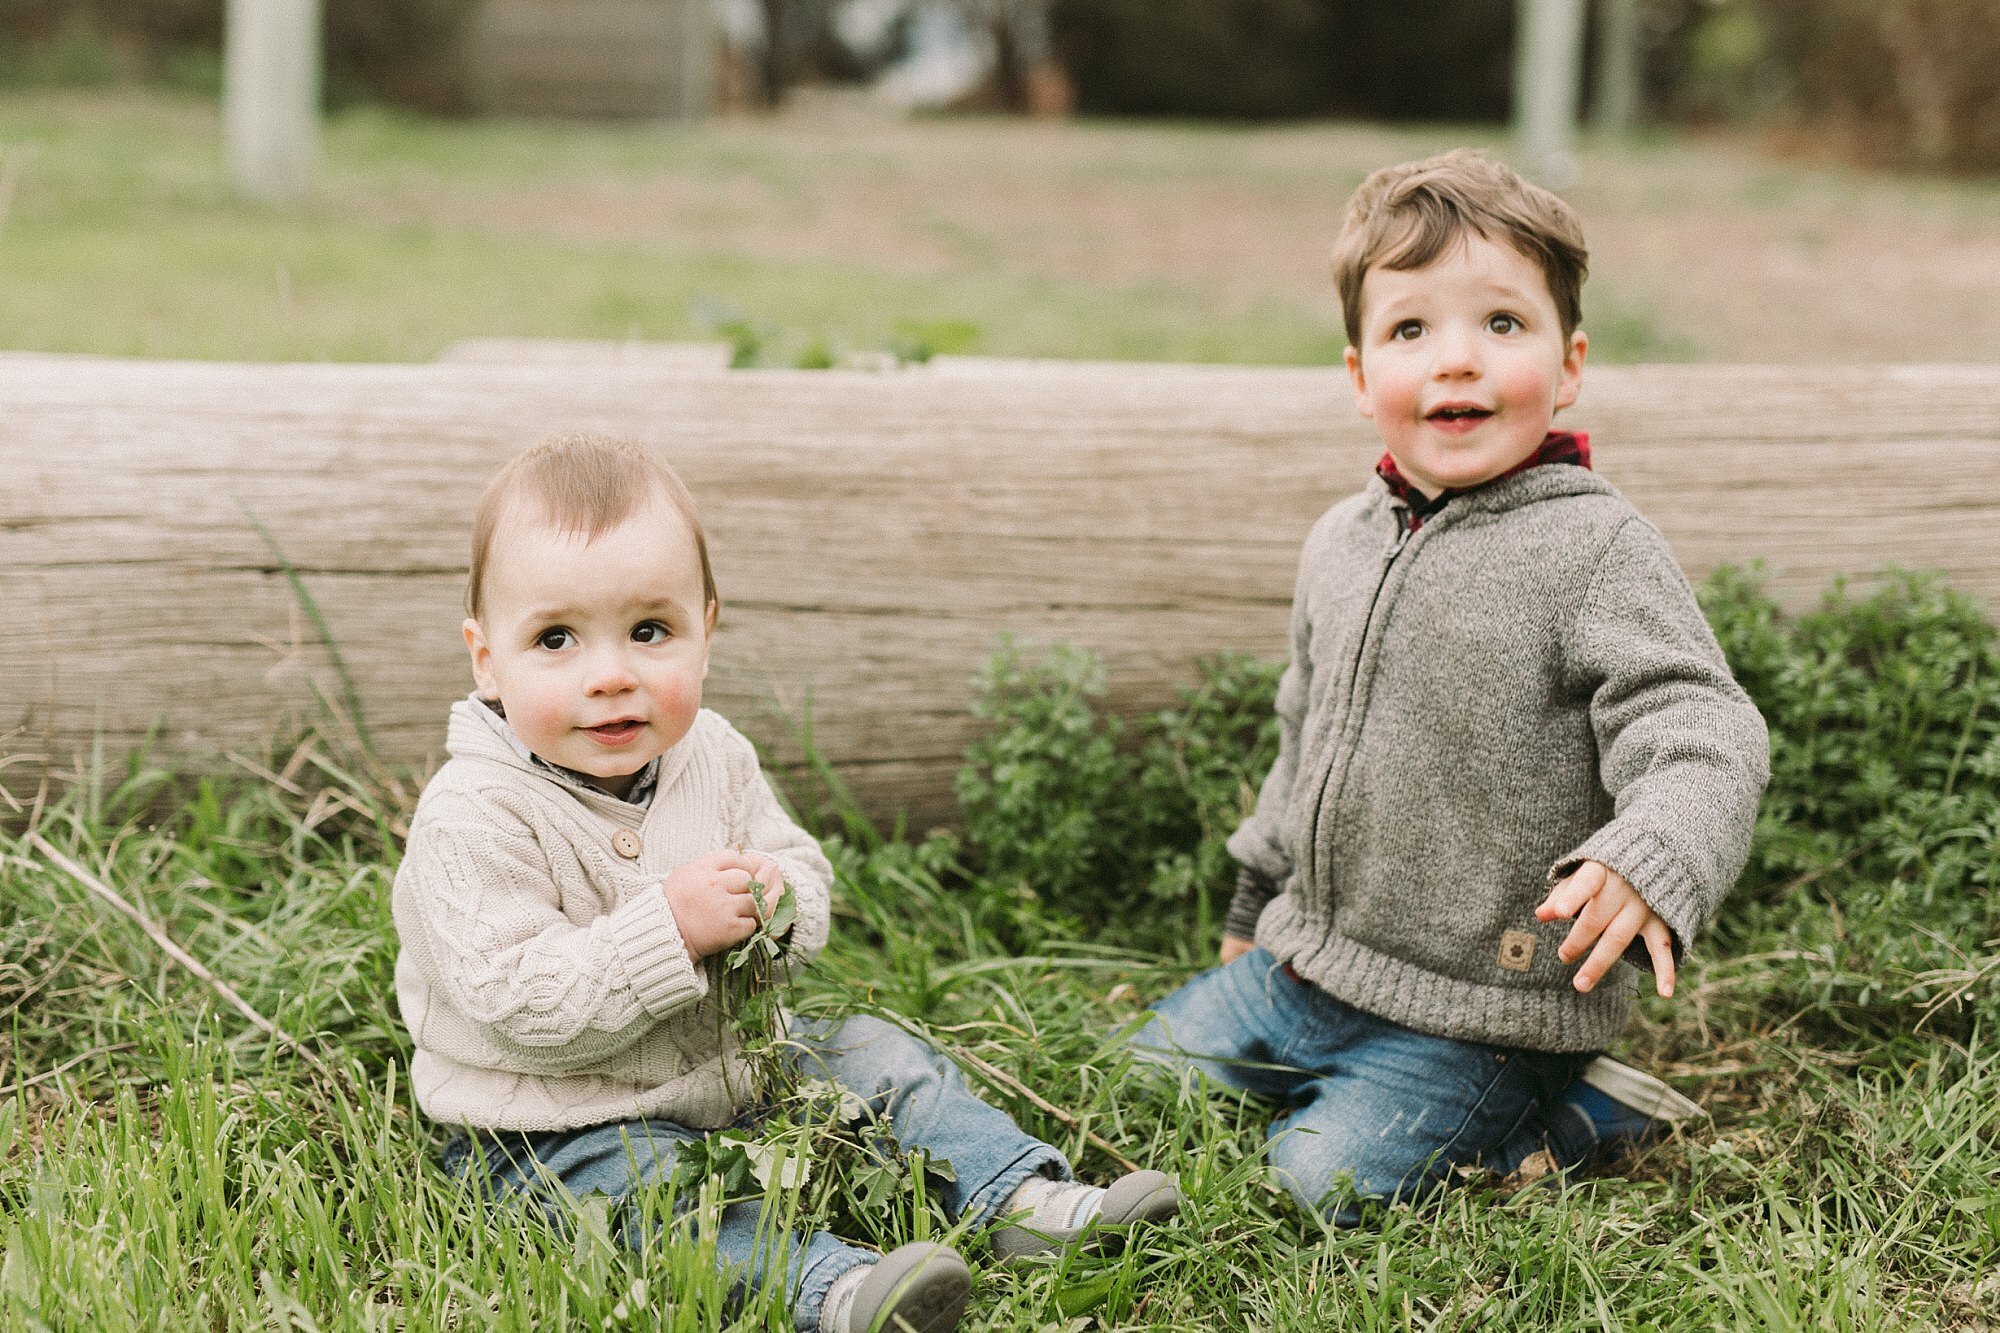 West Melbourne Maribyrnong Natural and Fun Family Photographer 264.JPG